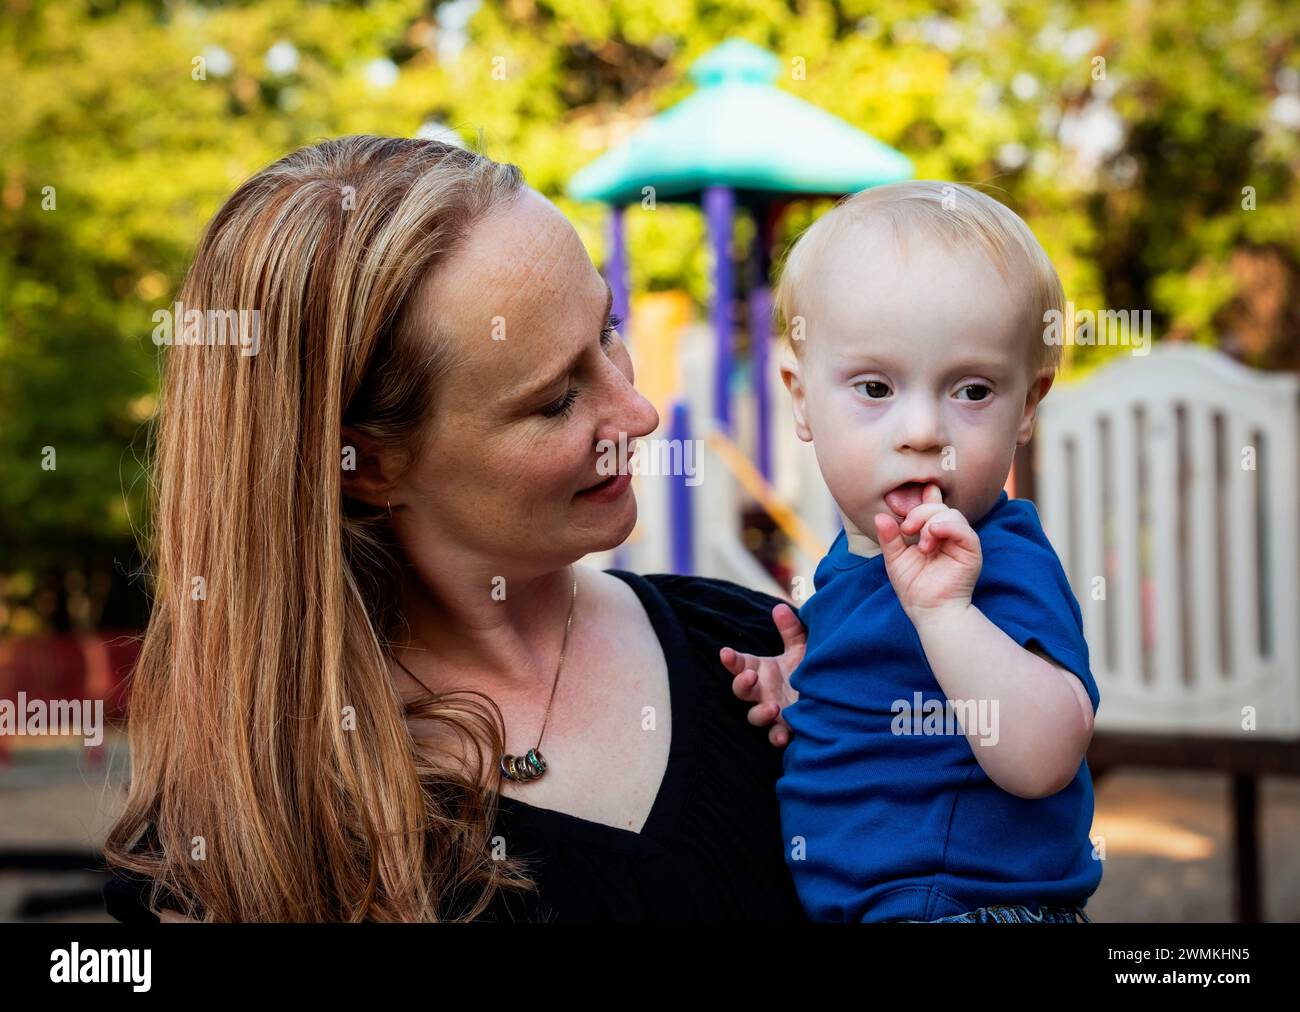 Mother spending quality time with her young son who has Down Syndrome in a city park during an autumn day; Leduc, Alberta, Canada Stock Photo